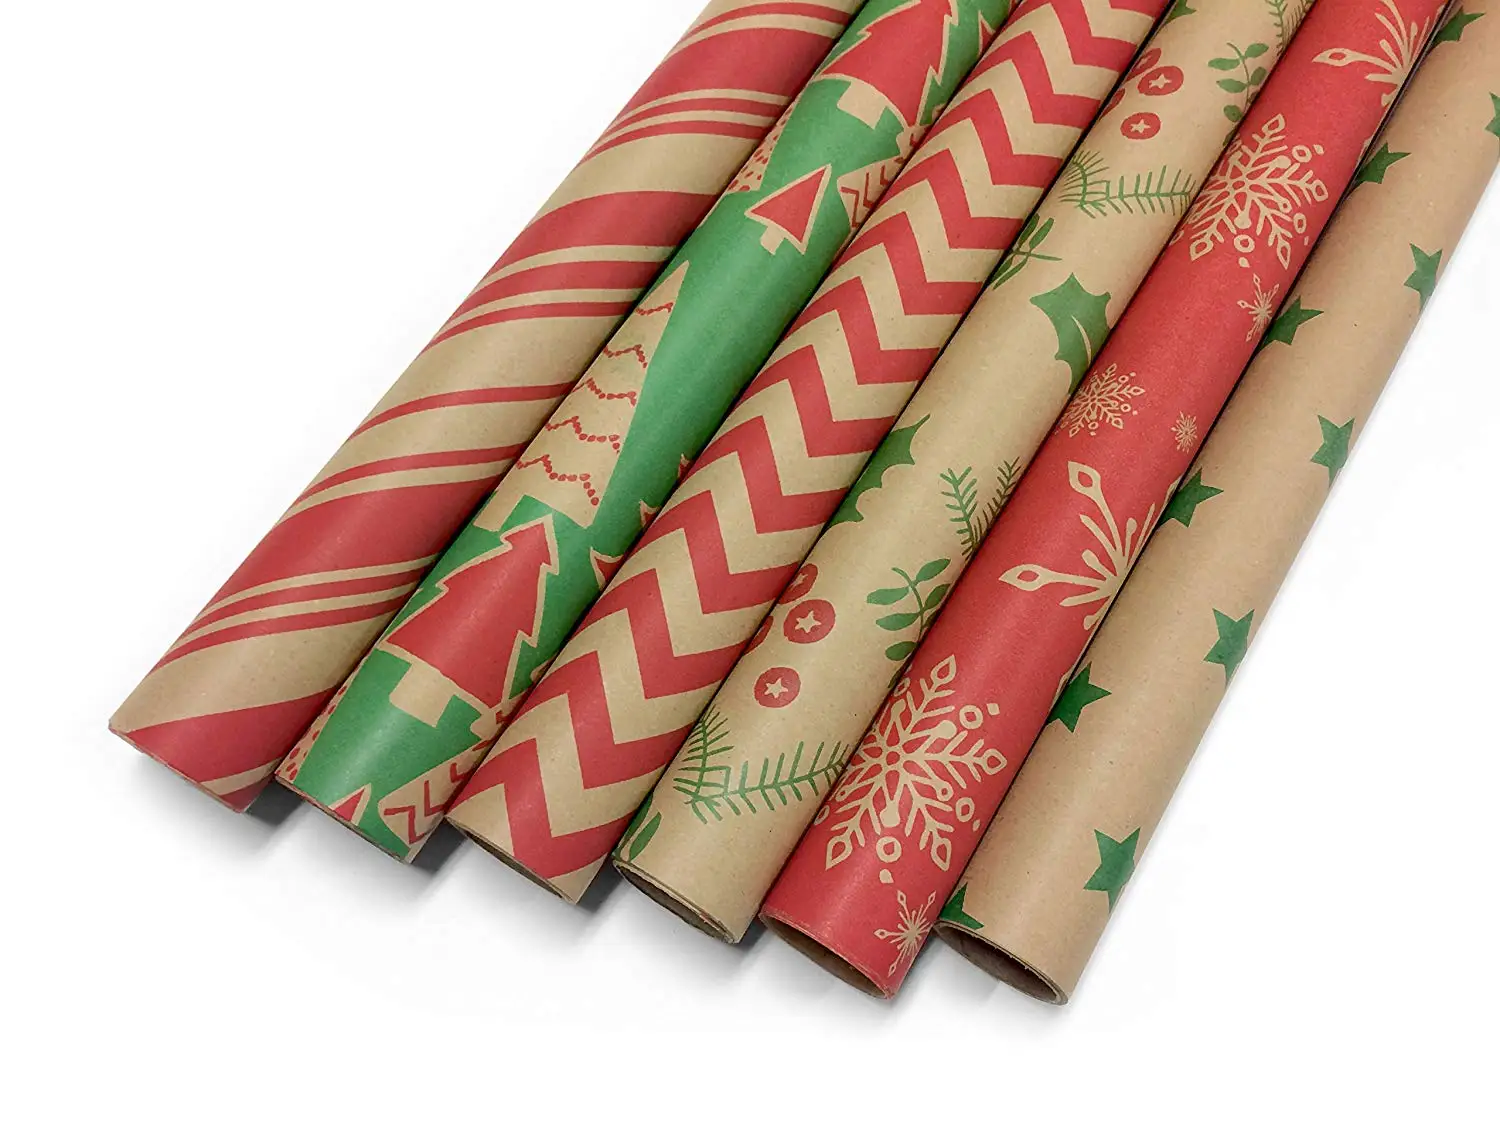 Kraft Classic Wrapping Paper Set - 6 Rolls - Multiple Patterns - 30" x...